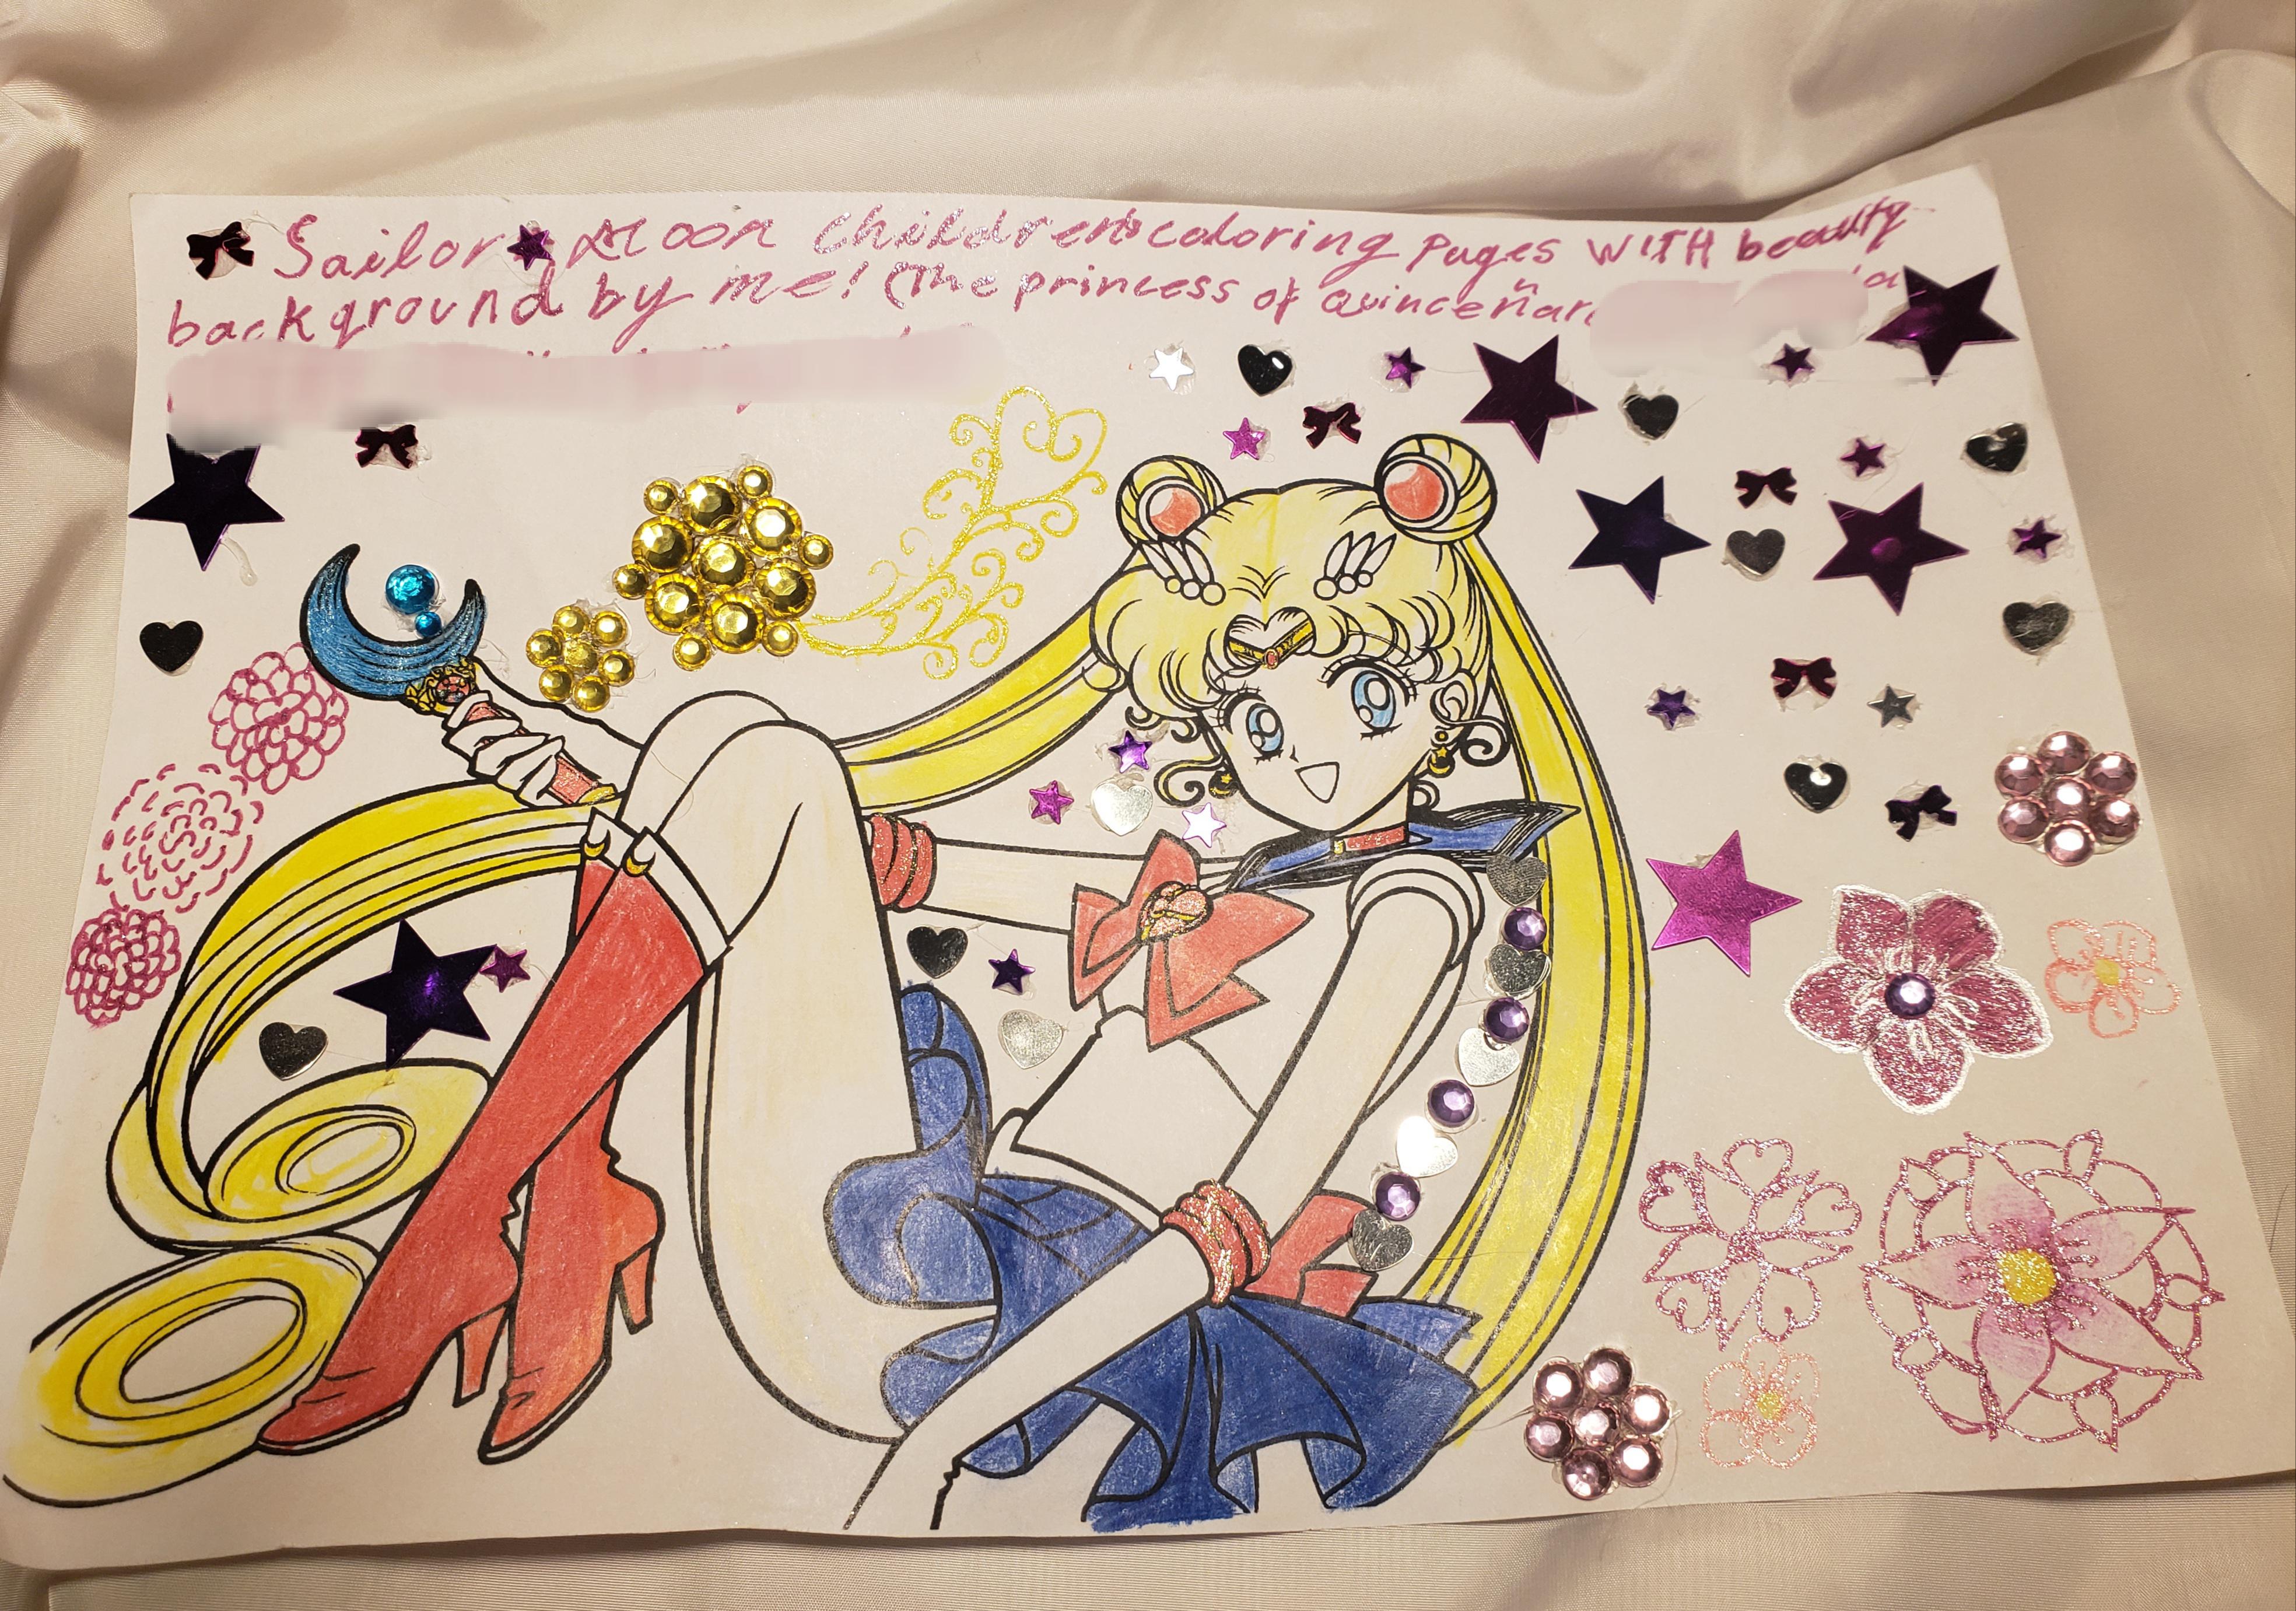 Sailor moon coloring pages with beauty background art by me the princess of quinceaãera nov to dec rsailormoon